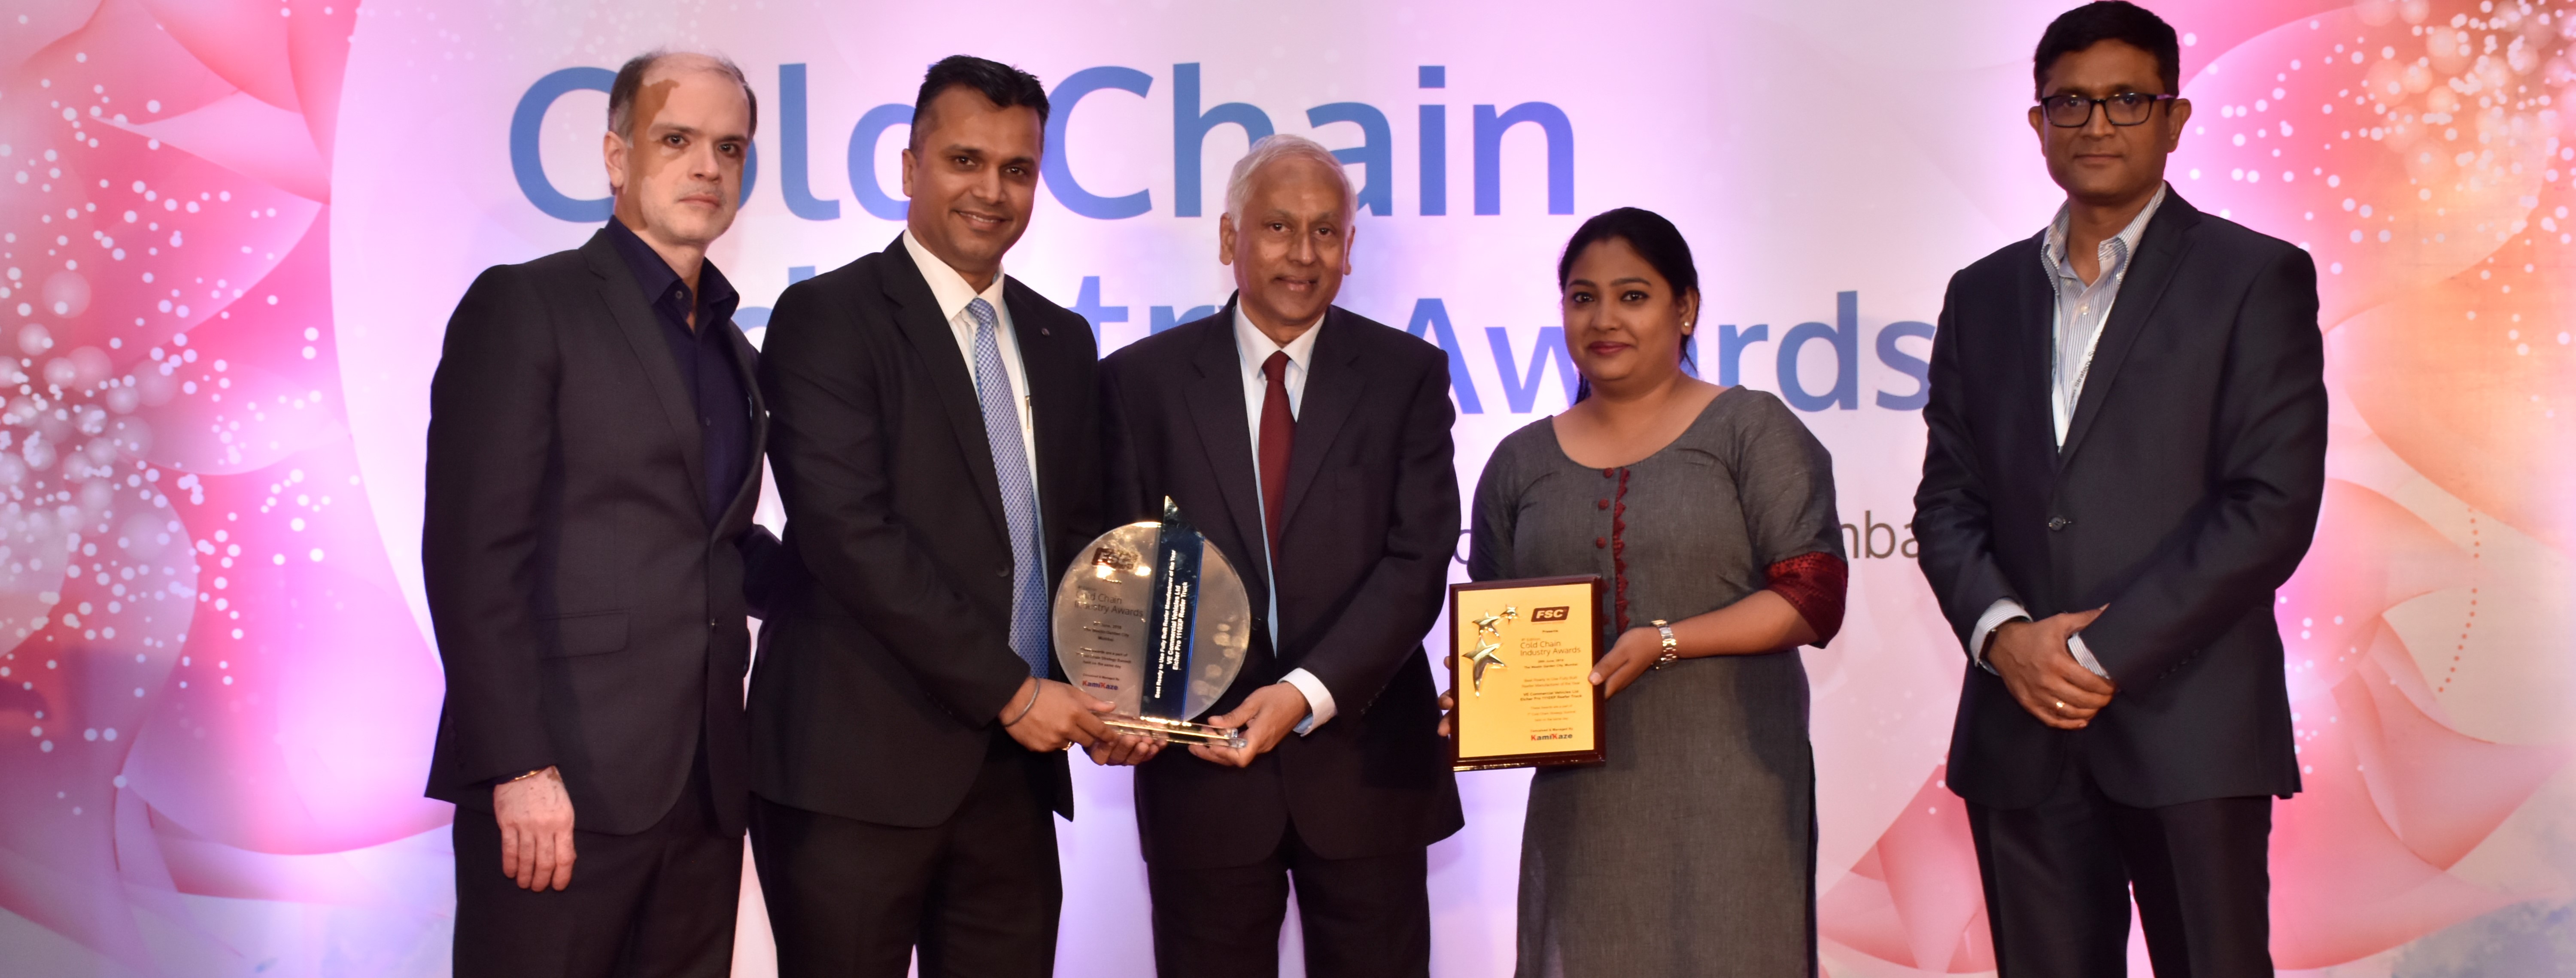 VECV bagged the prizes in two different categories at the 4th edition of the Cold Chain Industry Awards for Eicher Pro 1110XP reefer and Eicher Pro 1049